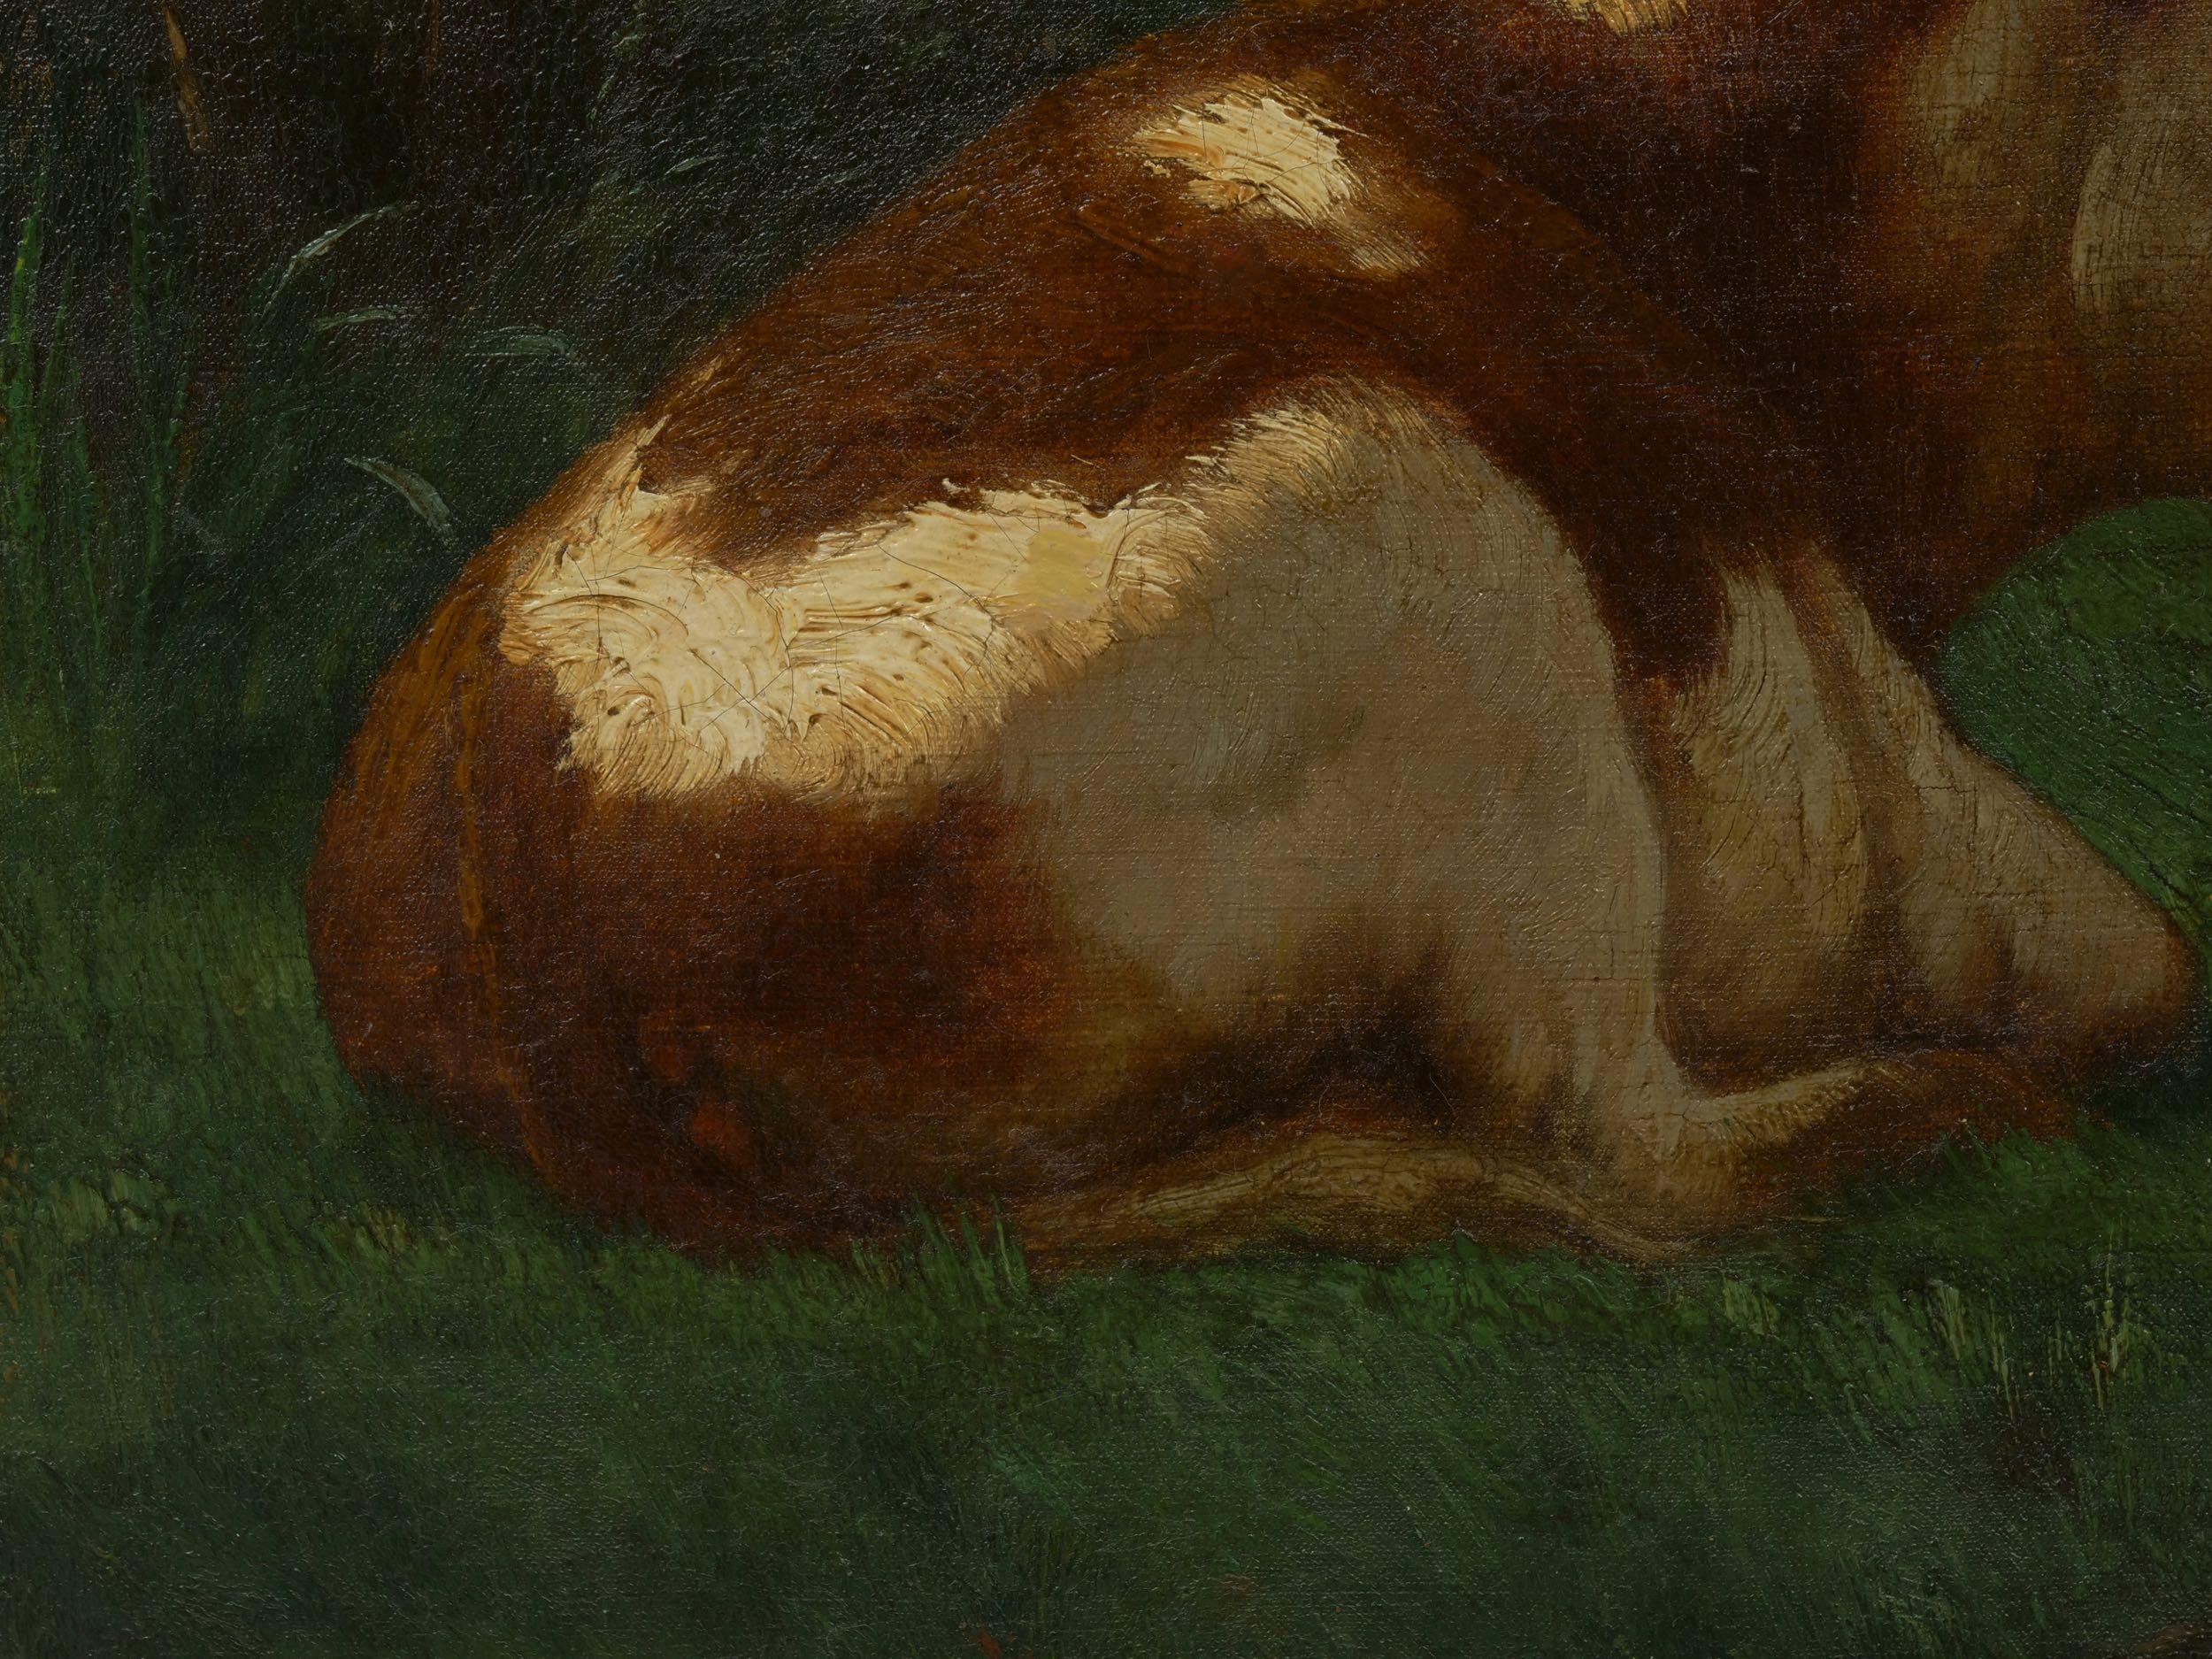 “Landscape of a Resting Bull” Oil Painting by John Carleton Wiggins 4